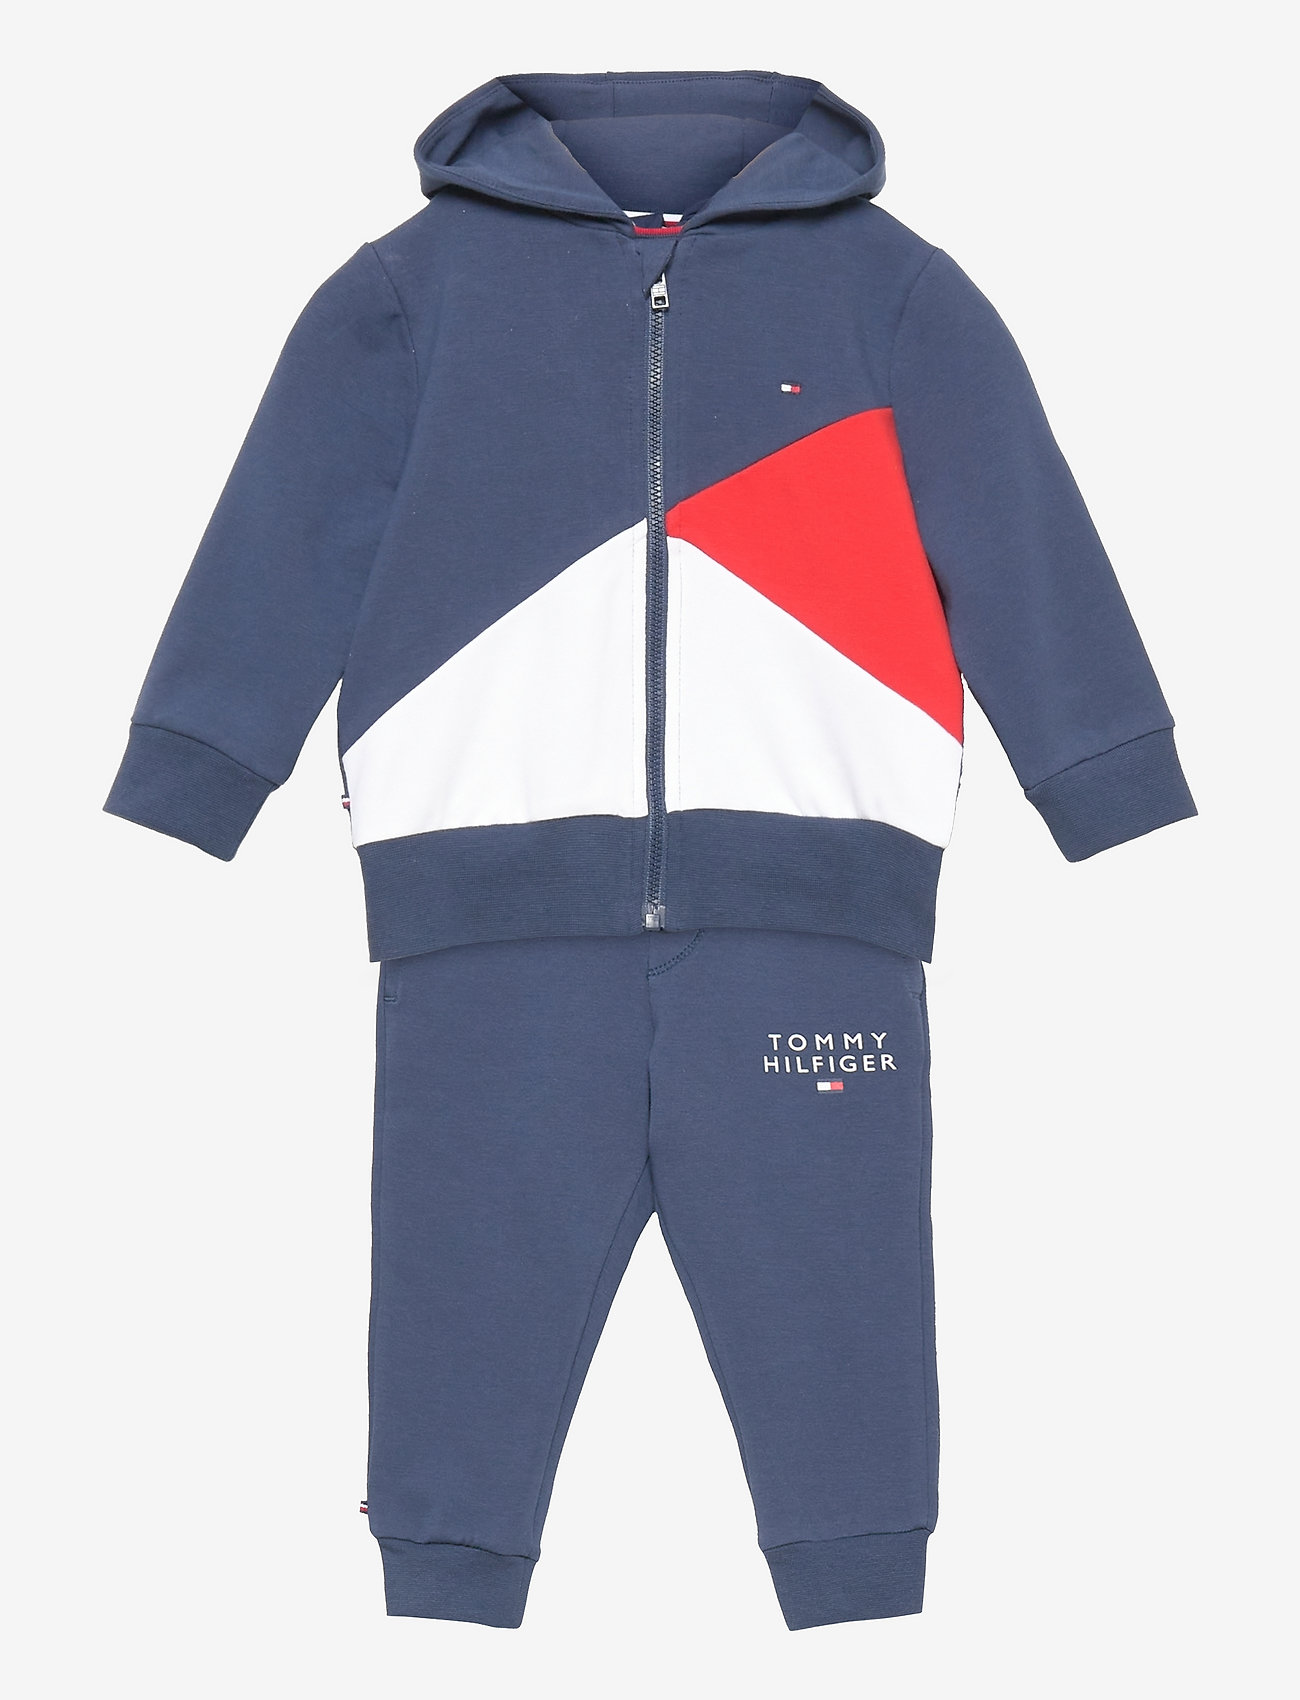 Tommy Hilfiger - BABY COLORBLOCK GIFT SET - clothing - twilight navy - 0